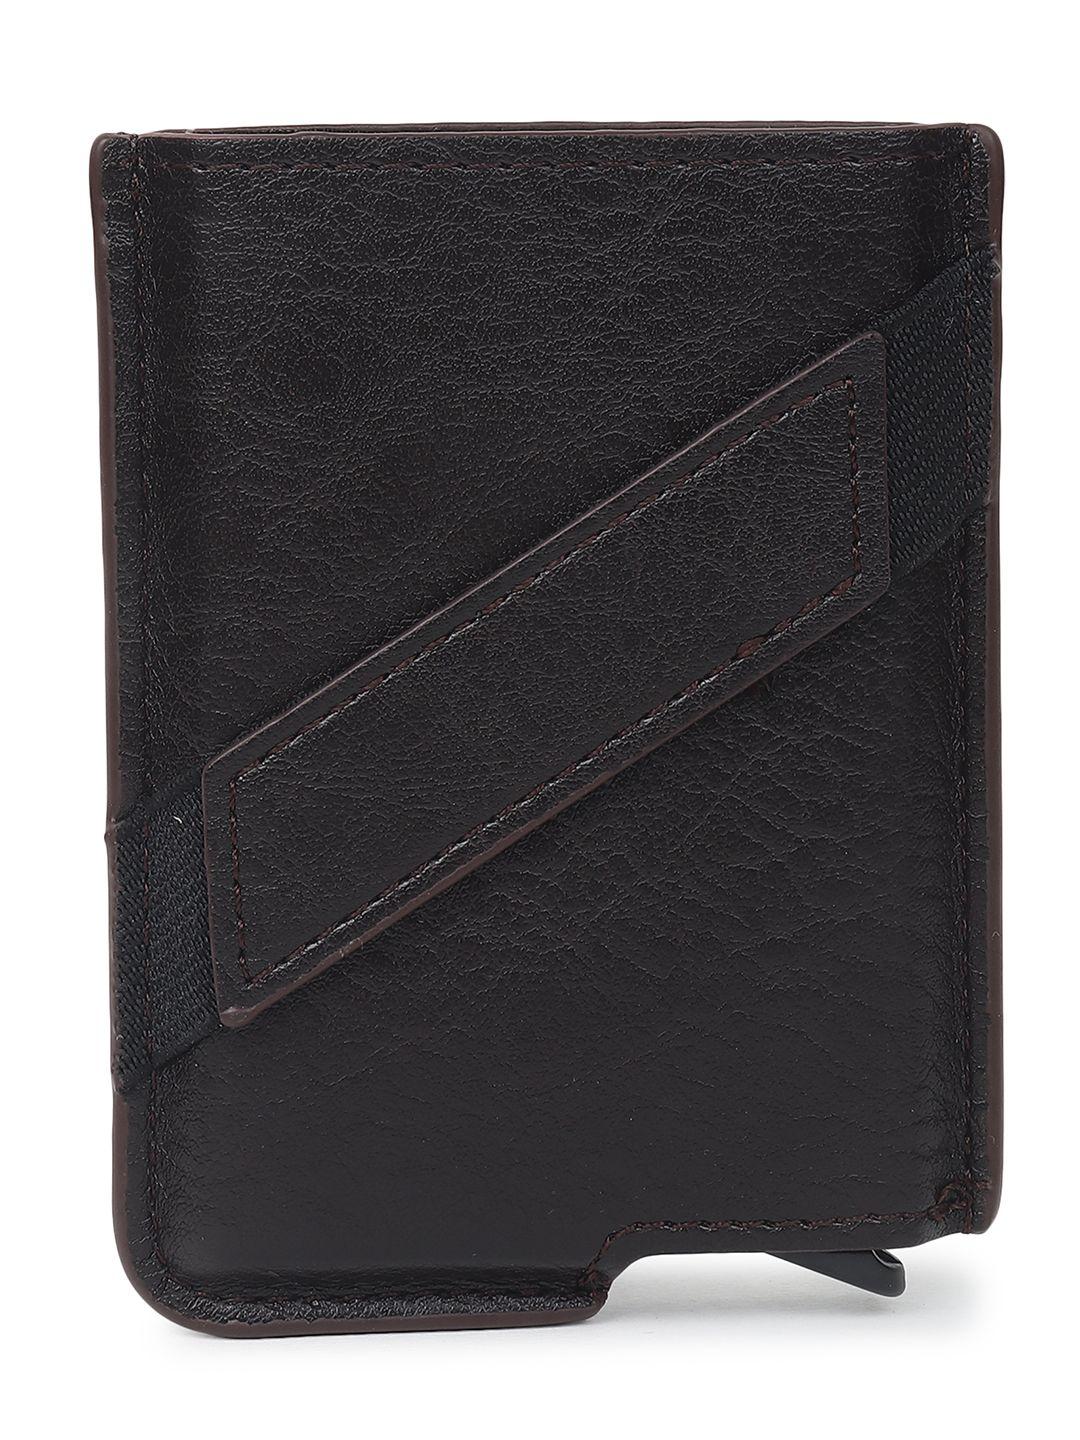 roadster textured leather card-holder wallets